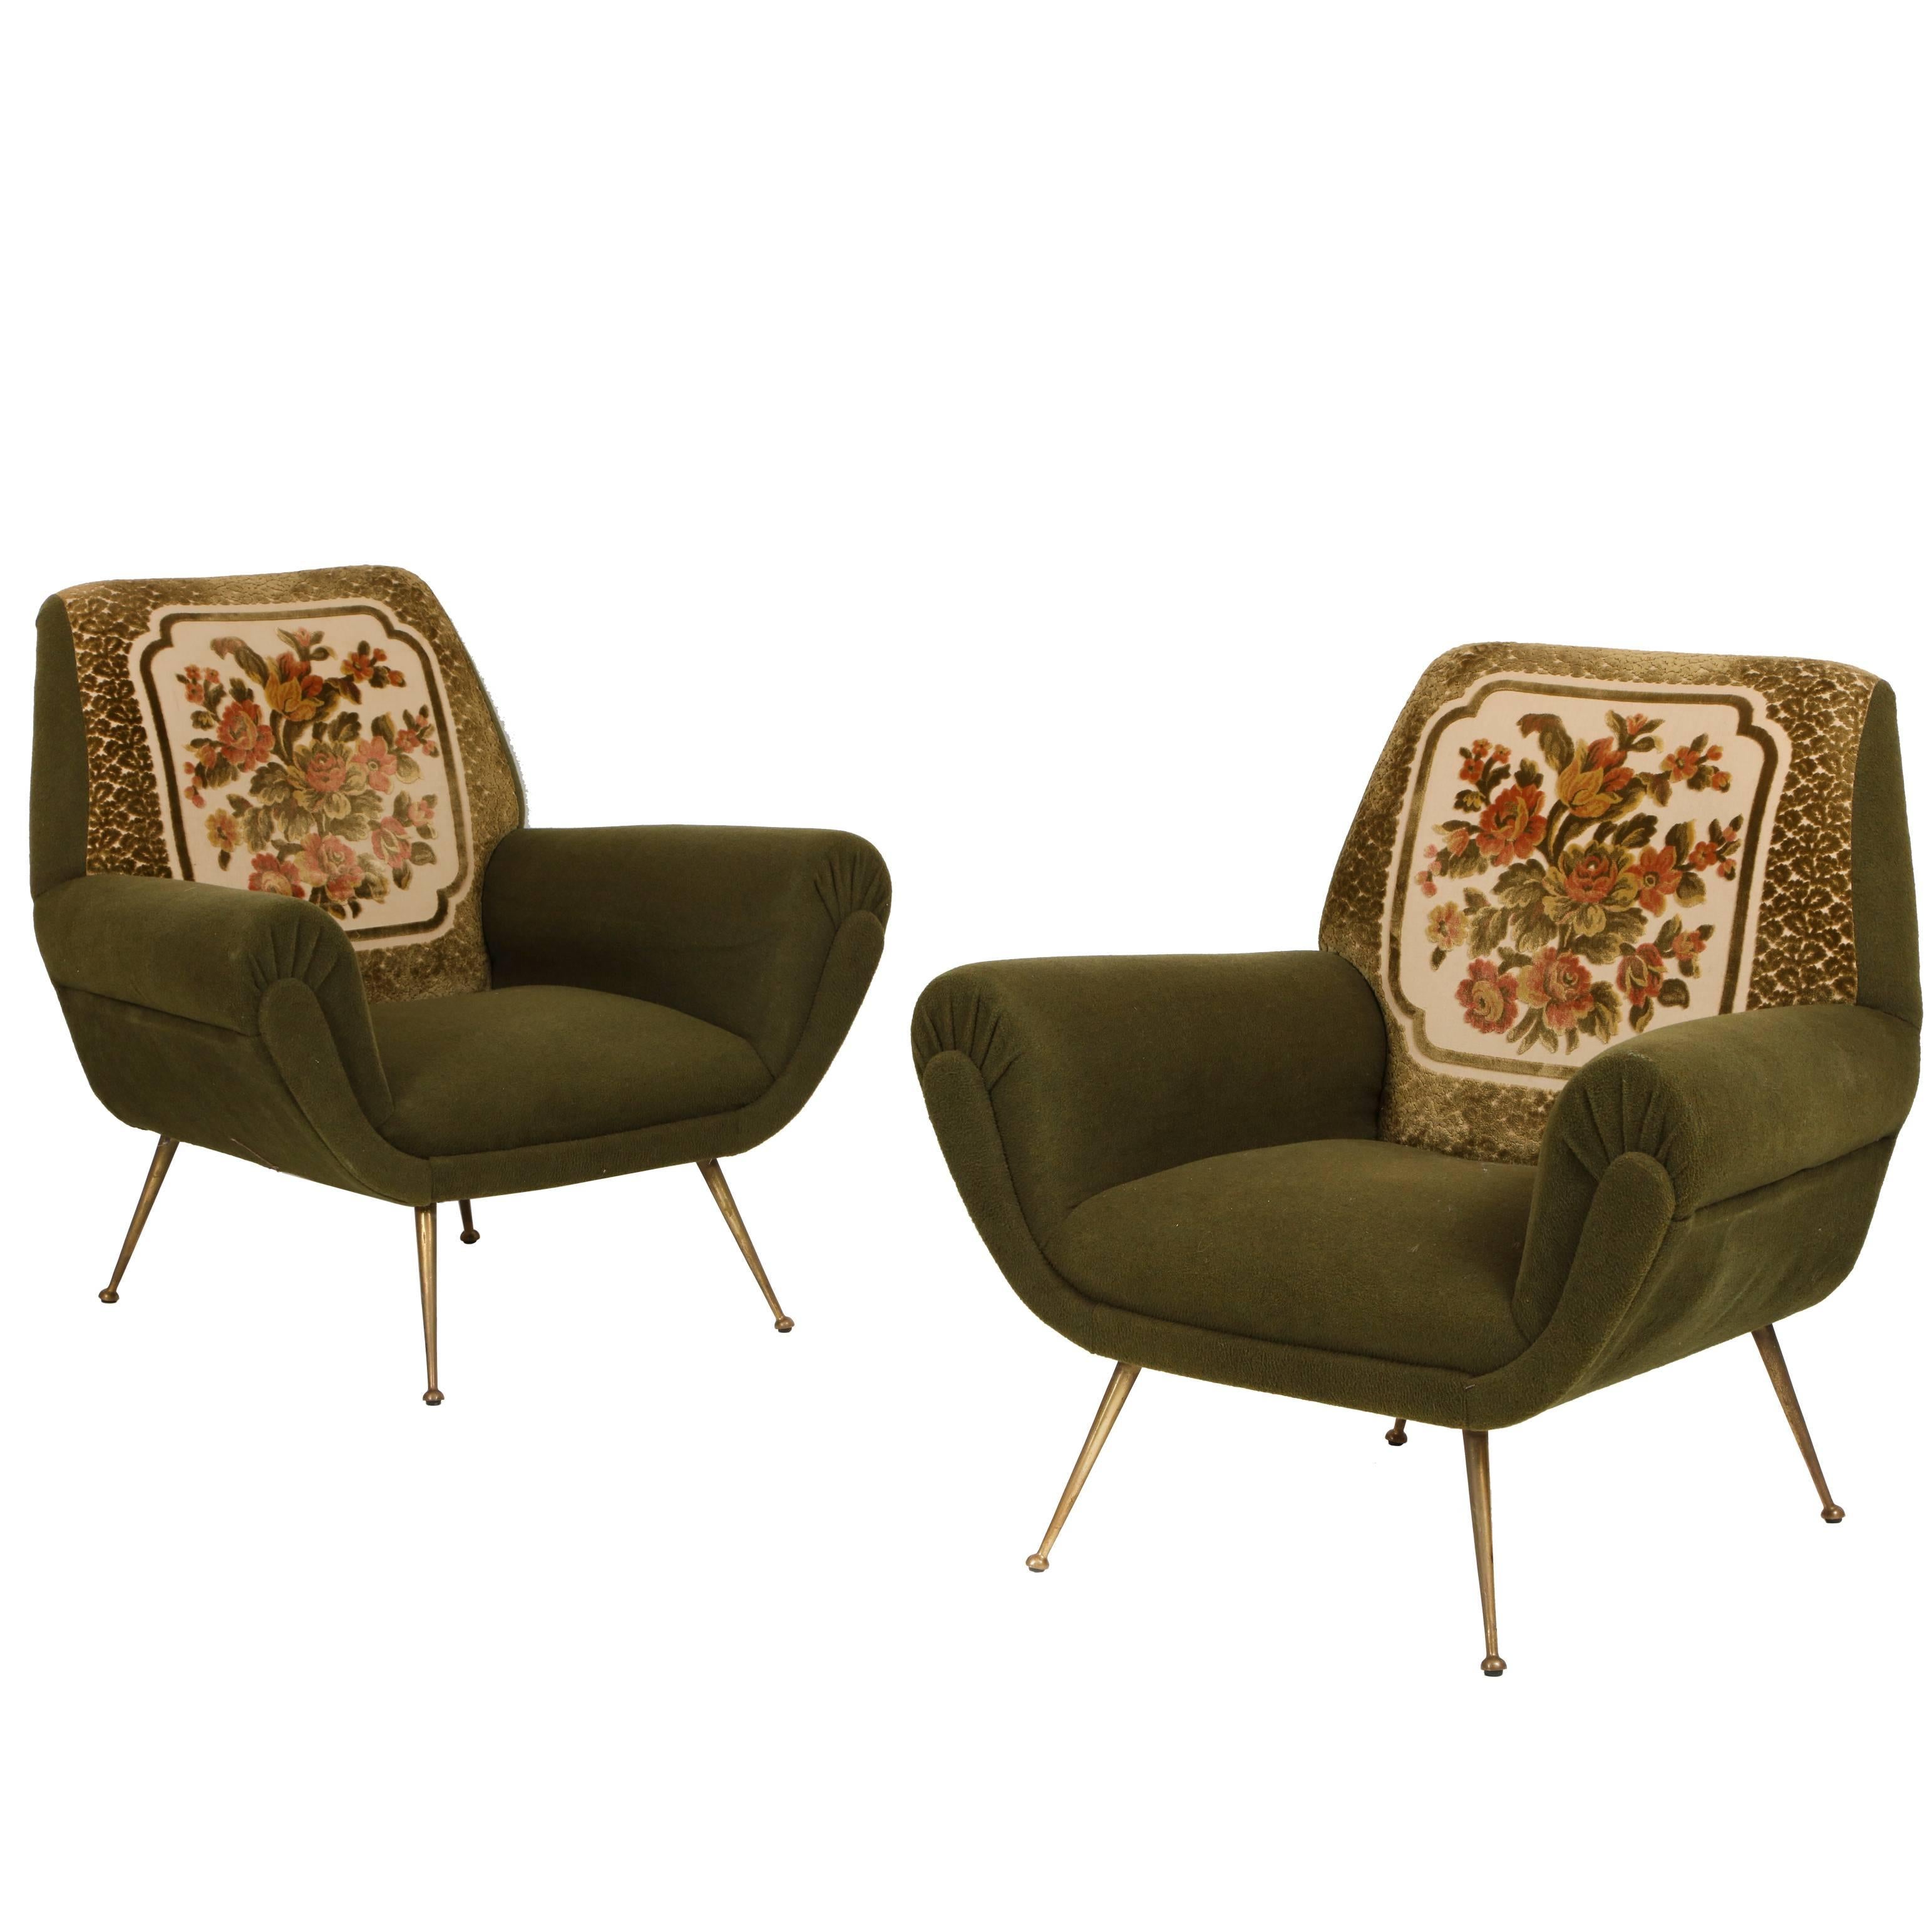 Italian Mid-Century green lounge chairs Gigi Radice Minotti original, 1950
Original Italian Mid-Century lounge chairs with original embroidery fabric on the back.
In very good vintage condition with soft wool like fabric on the rest of the